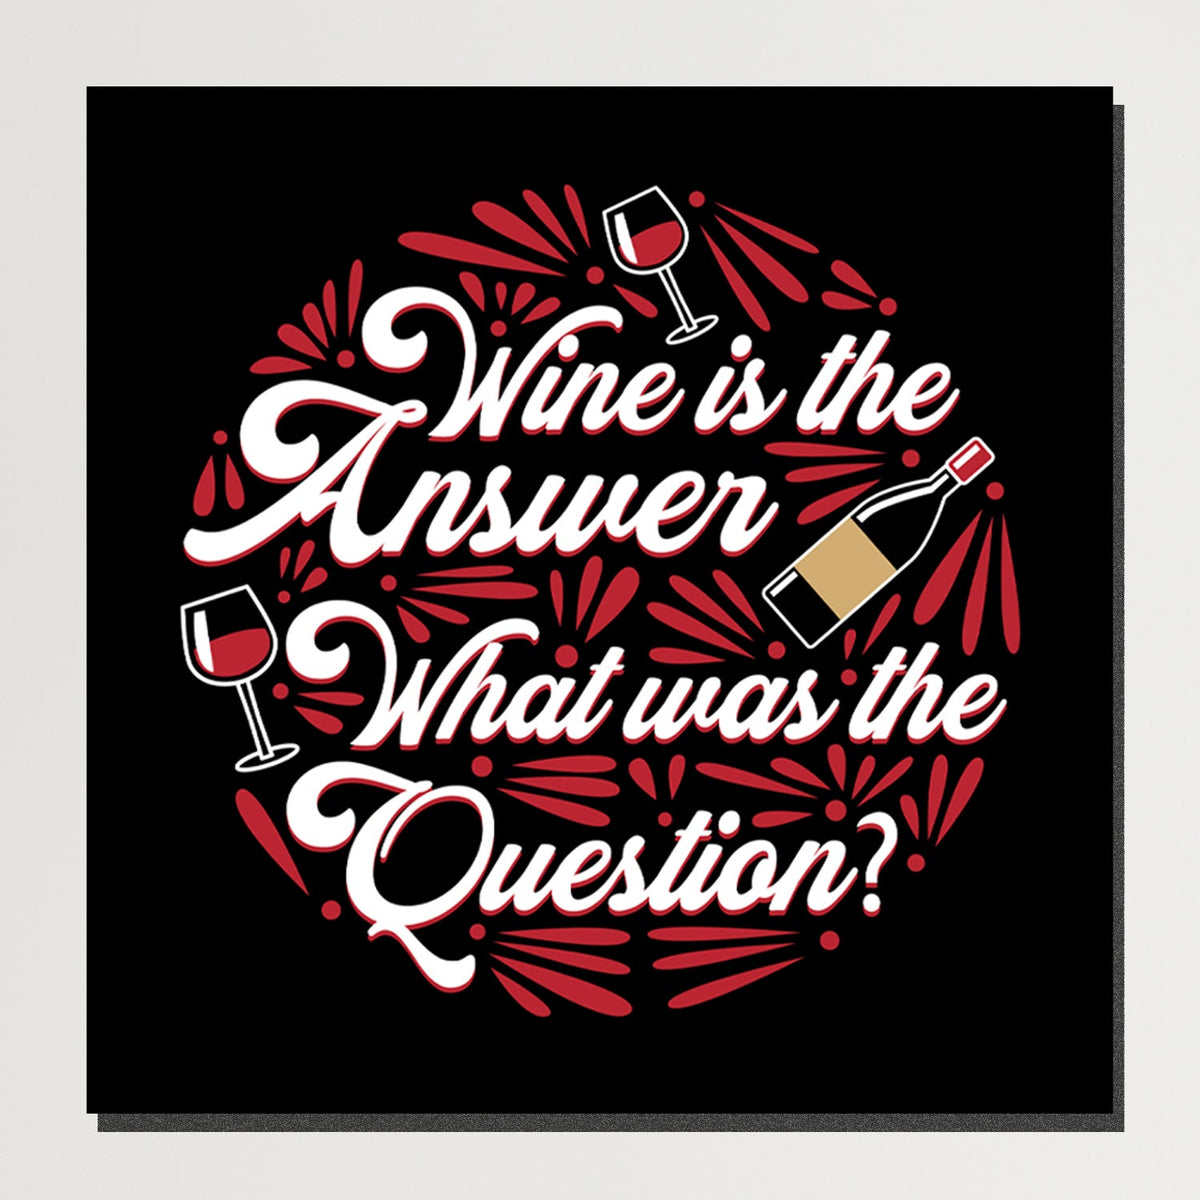 https://cdn.shopify.com/s/files/1/0387/9986/8044/products/WineistheAnswerCanvasArtprintStretched-Plain.jpg